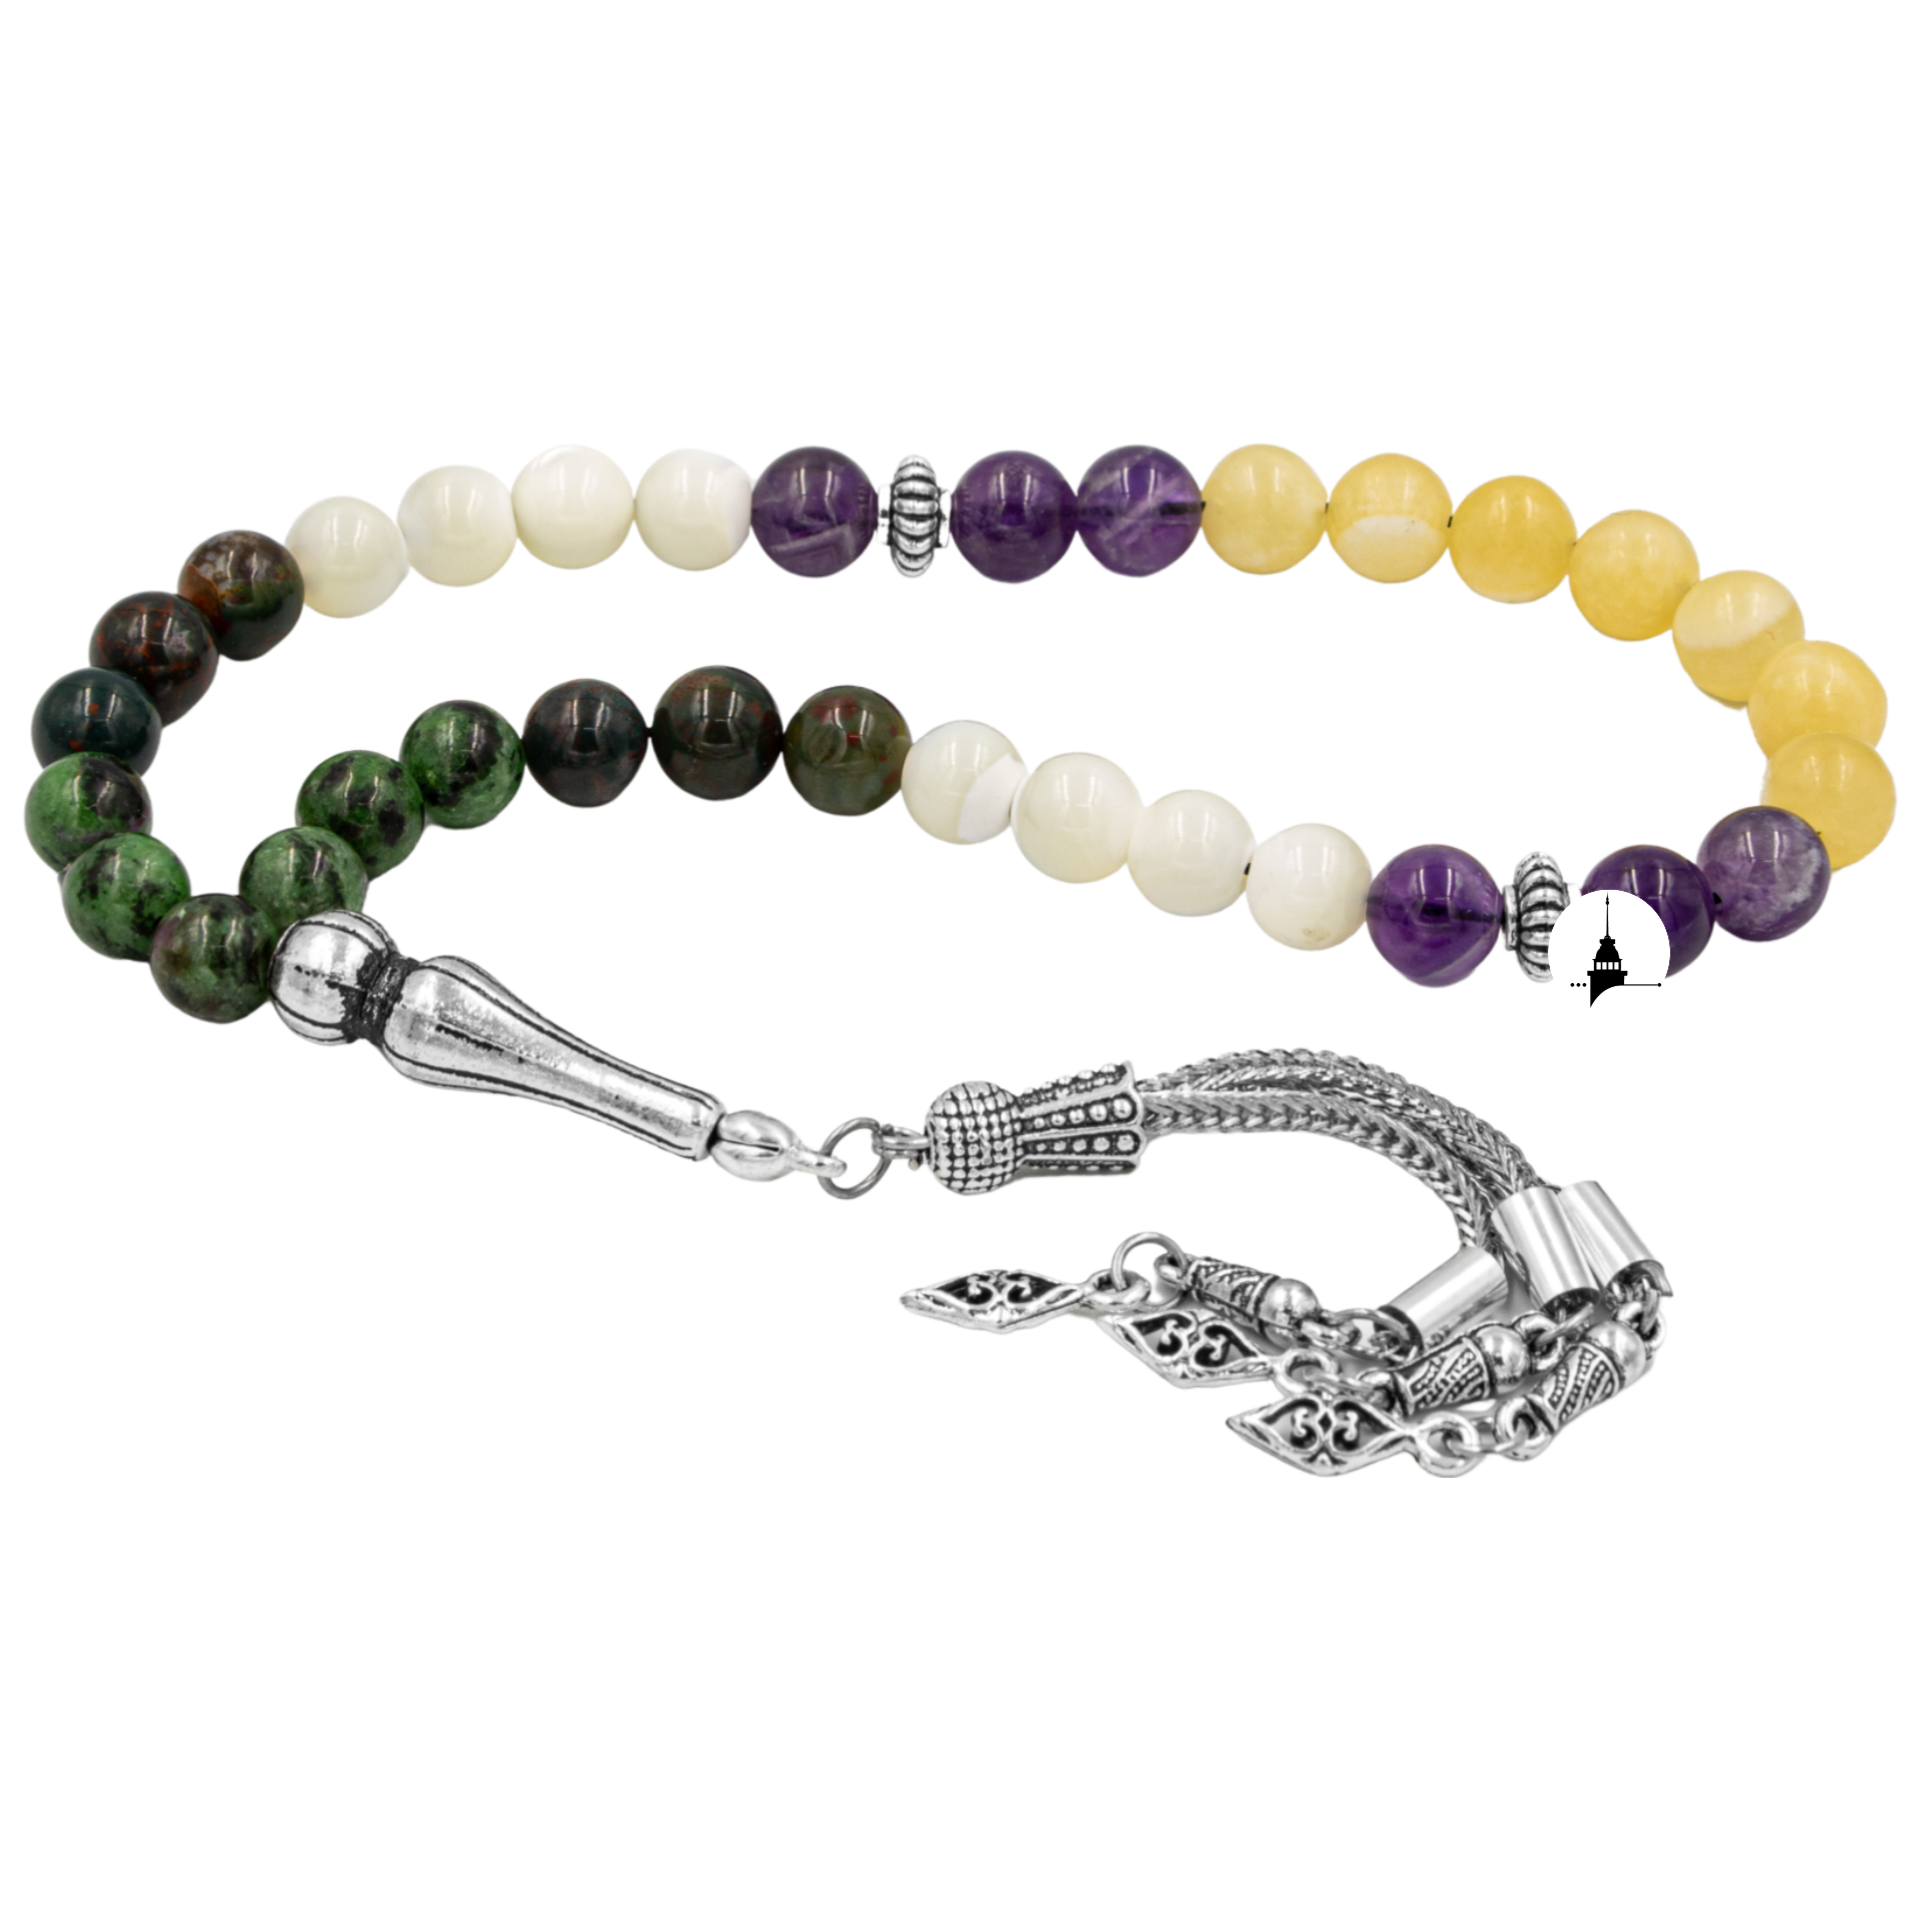 Cancer Rosary - Amethyst, Anyolite, Aragonite, Blood Stone, Mother of Pearl